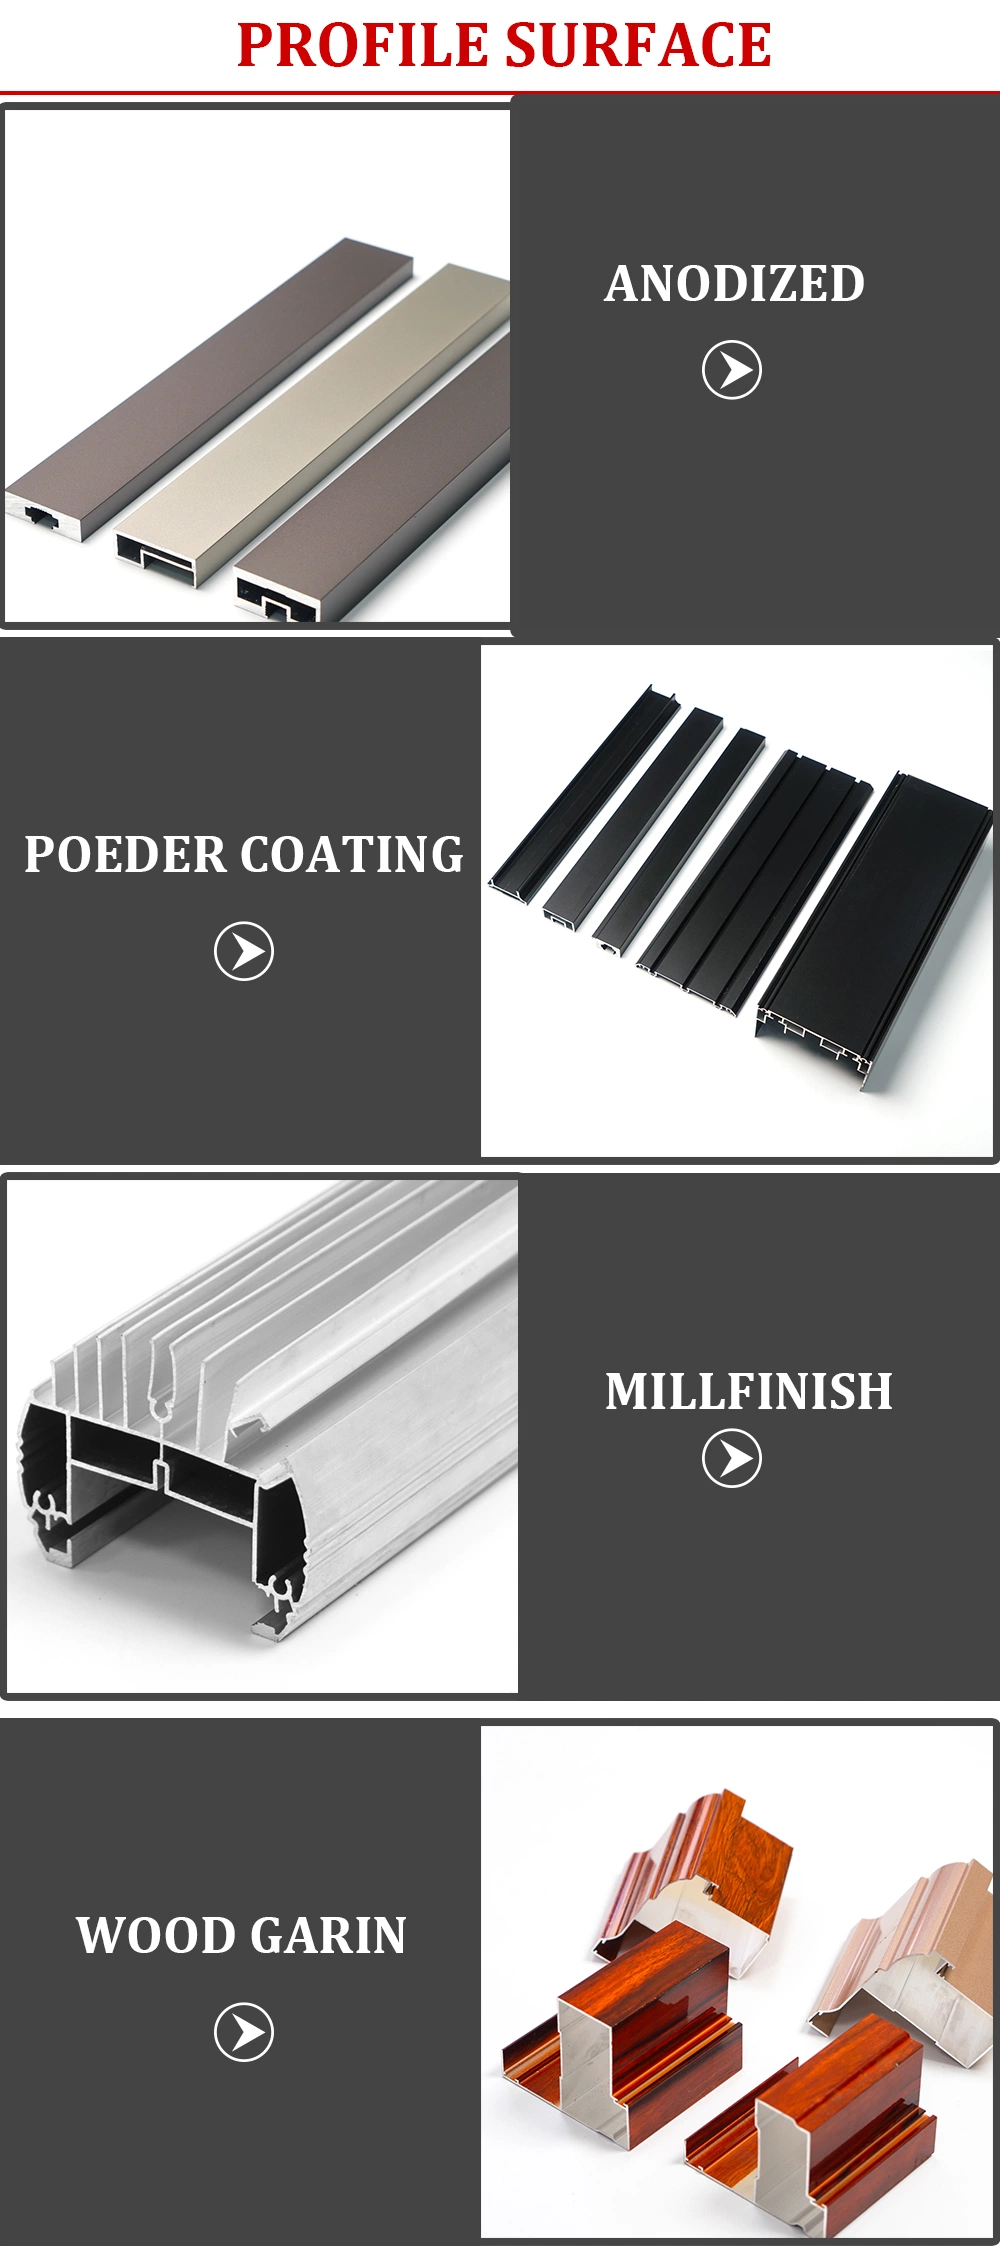 Qualicoated Powder Coating Aluminium Profile for Metal Sliding Window Door and Casement Awing Glass Window